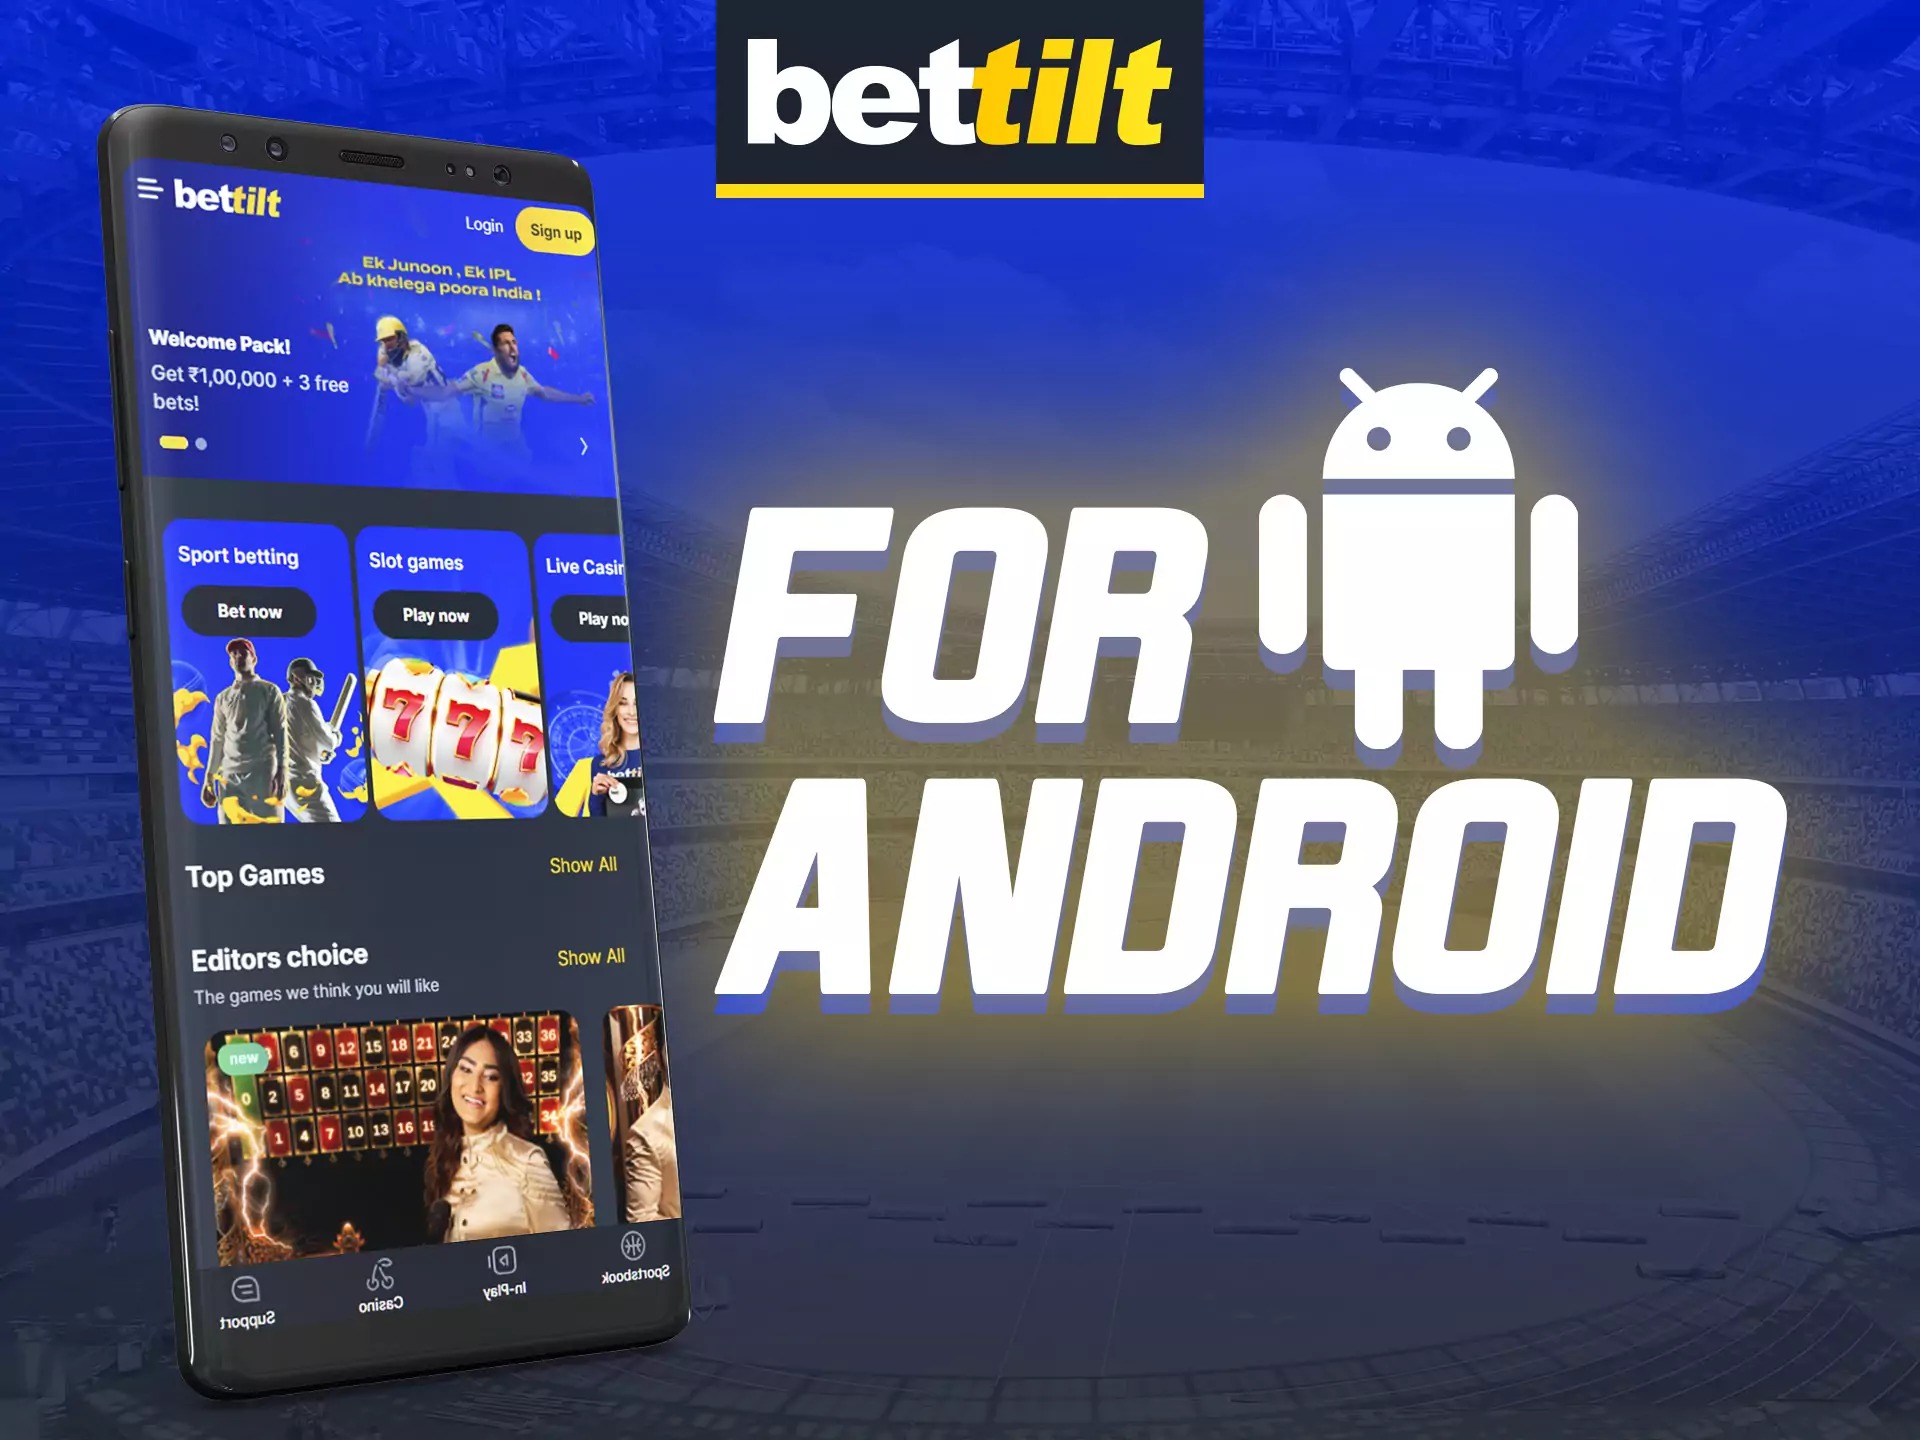 The Bettilt app can be installed on your Android phone.